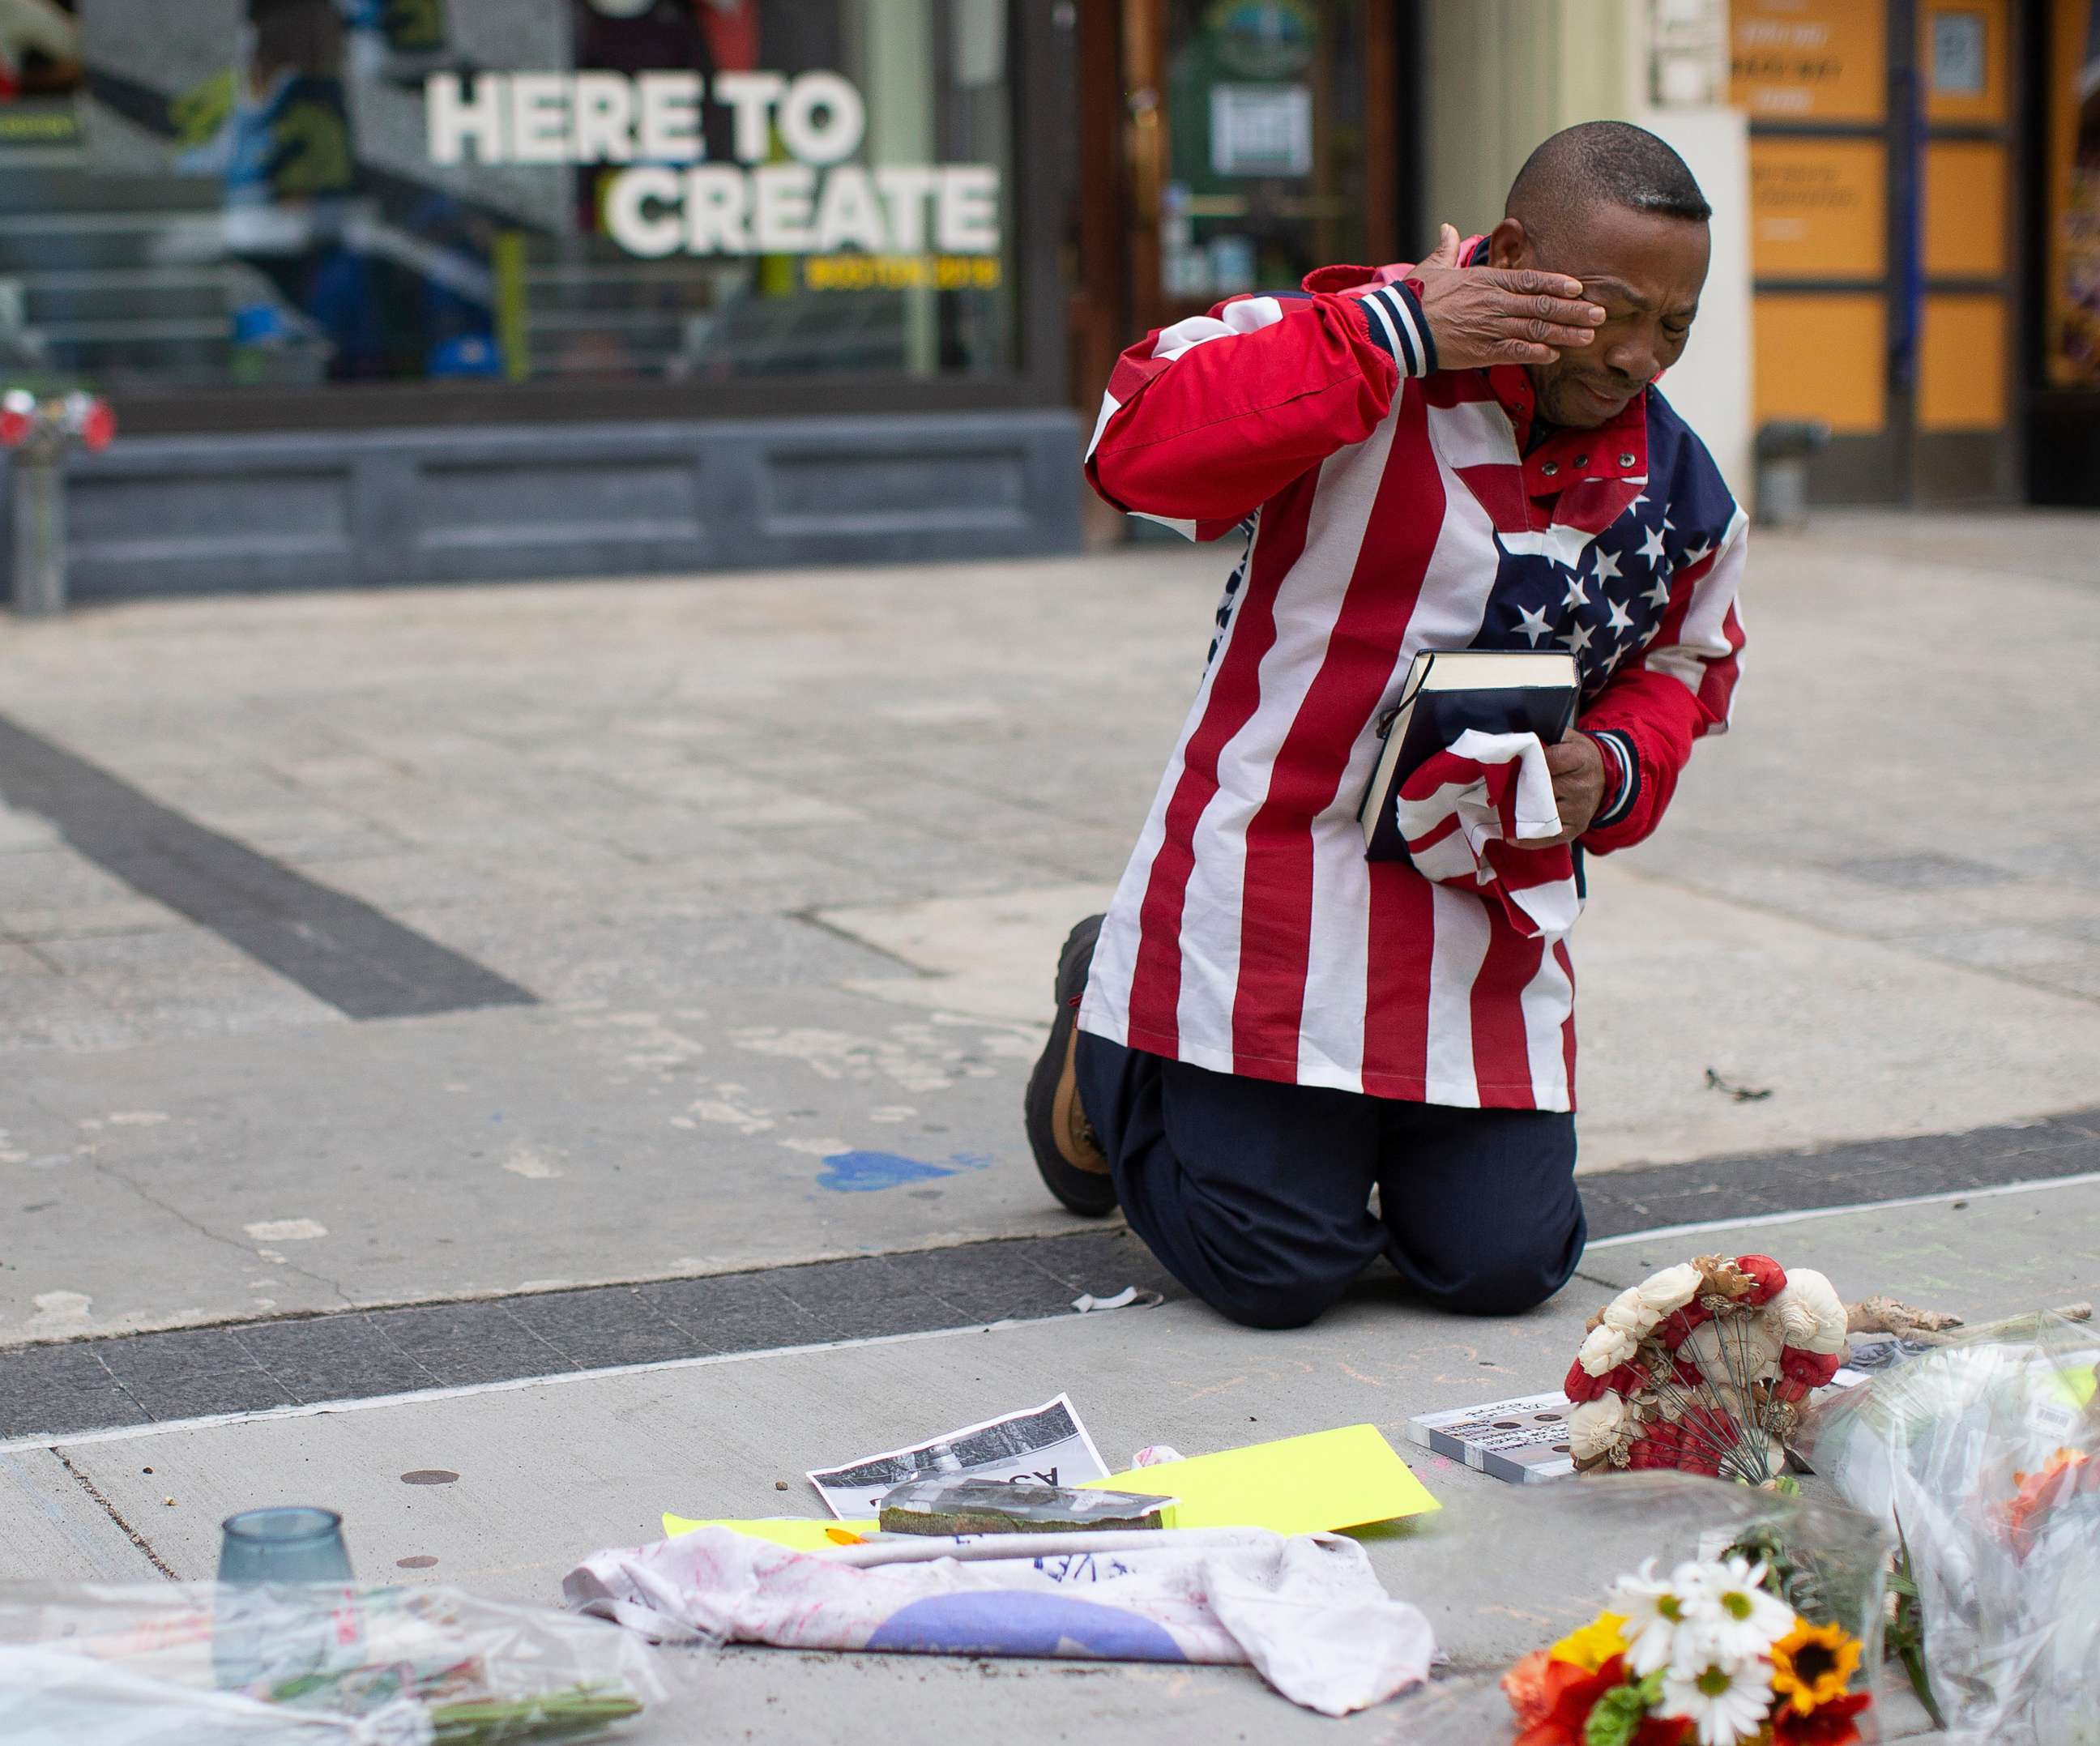 Christopher Nzenwa wipes tears away after praying at a memorial outside of Marathon Sports at the location of the first explosion, during a memorial ceremony on the fifth anniversary of the Boston Marathon Bombing in Boston, April 15, 2018.